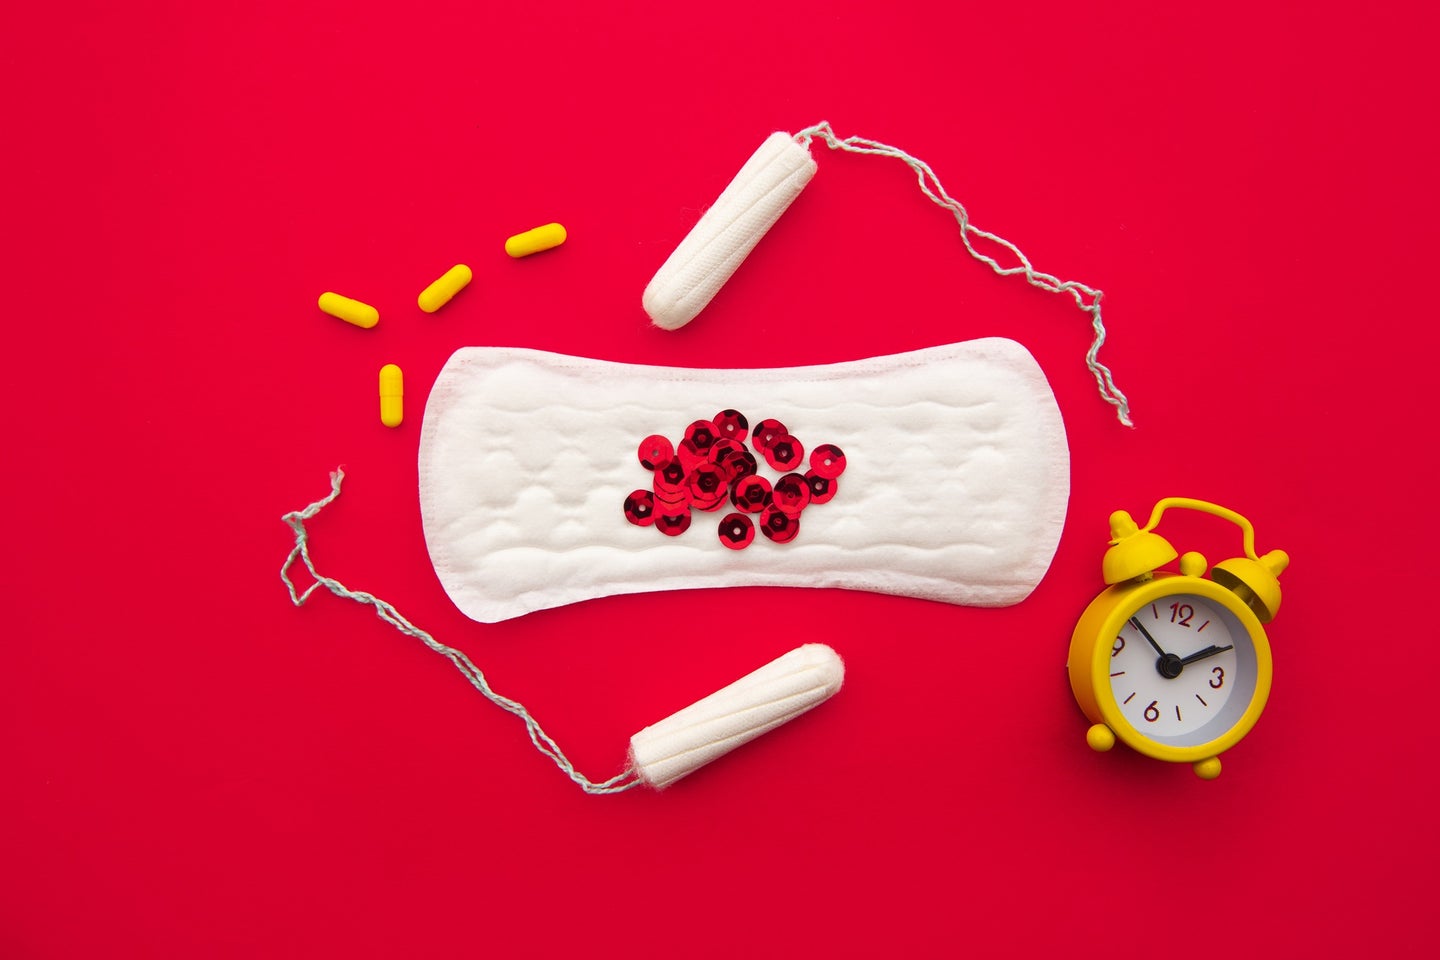 Pad with red sequins next to two tampons, yellow hormone pills, and an alarm clock to represent irregular periods